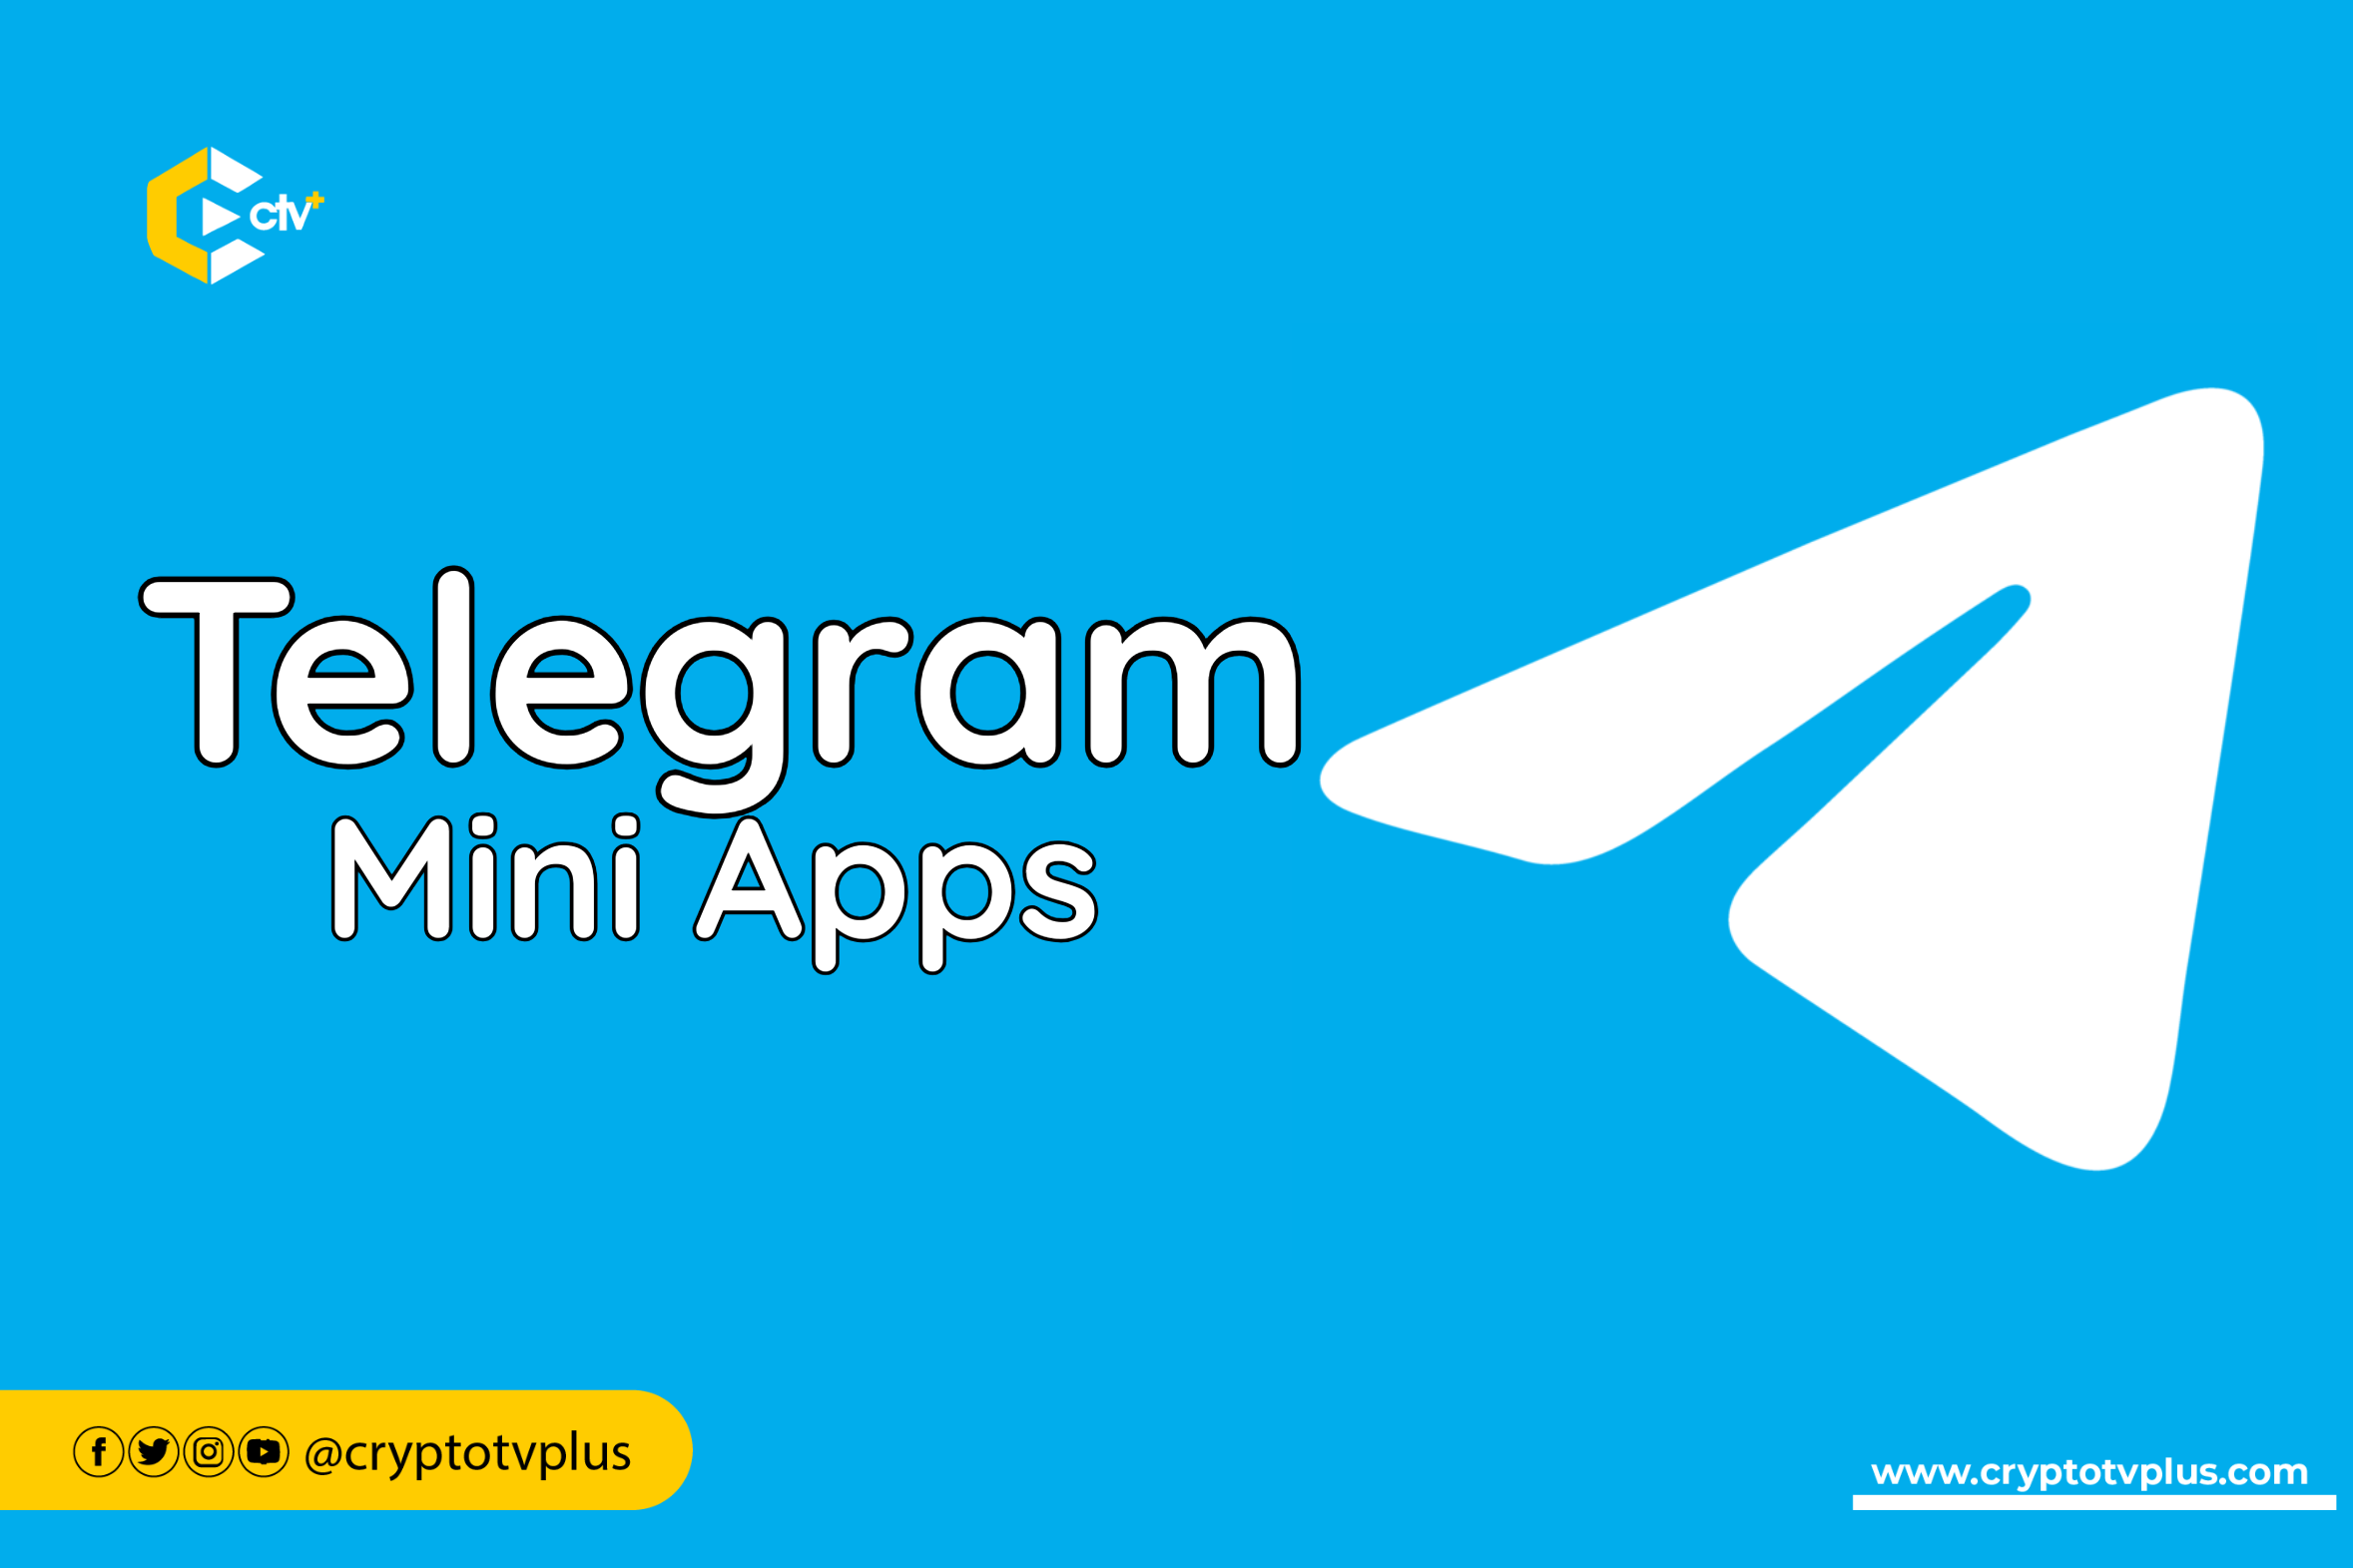 Telegram Mini Apps: Discover how these lightweight, integrated applications enhance user experience by providing seamless functionality within chats.